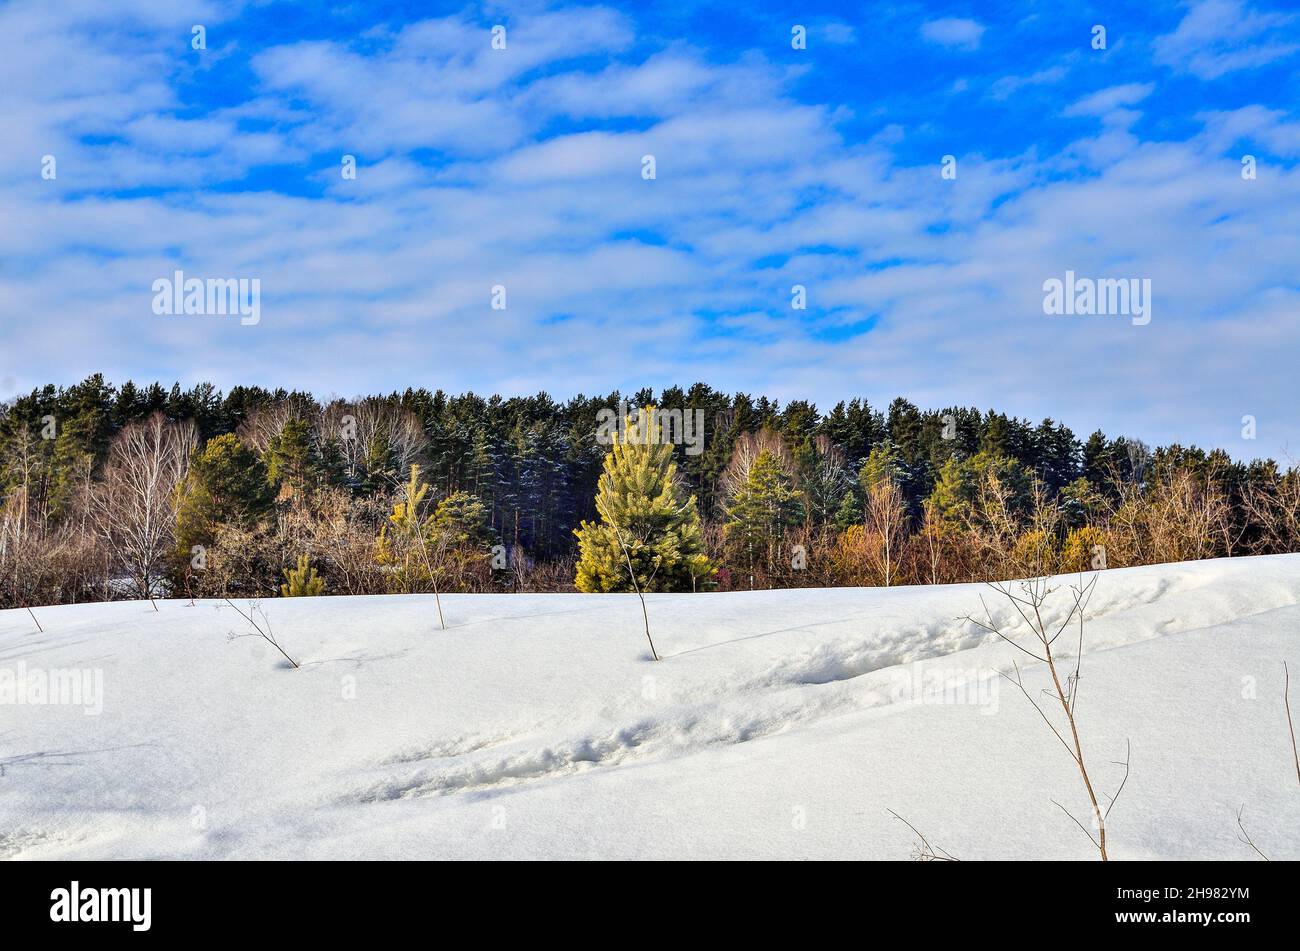 Pine forest on top of hill - winter landscape at sunny day with blue sky. Evergreen coniferous trees with sunlight illuminated. Fairy tale of winter n Stock Photo